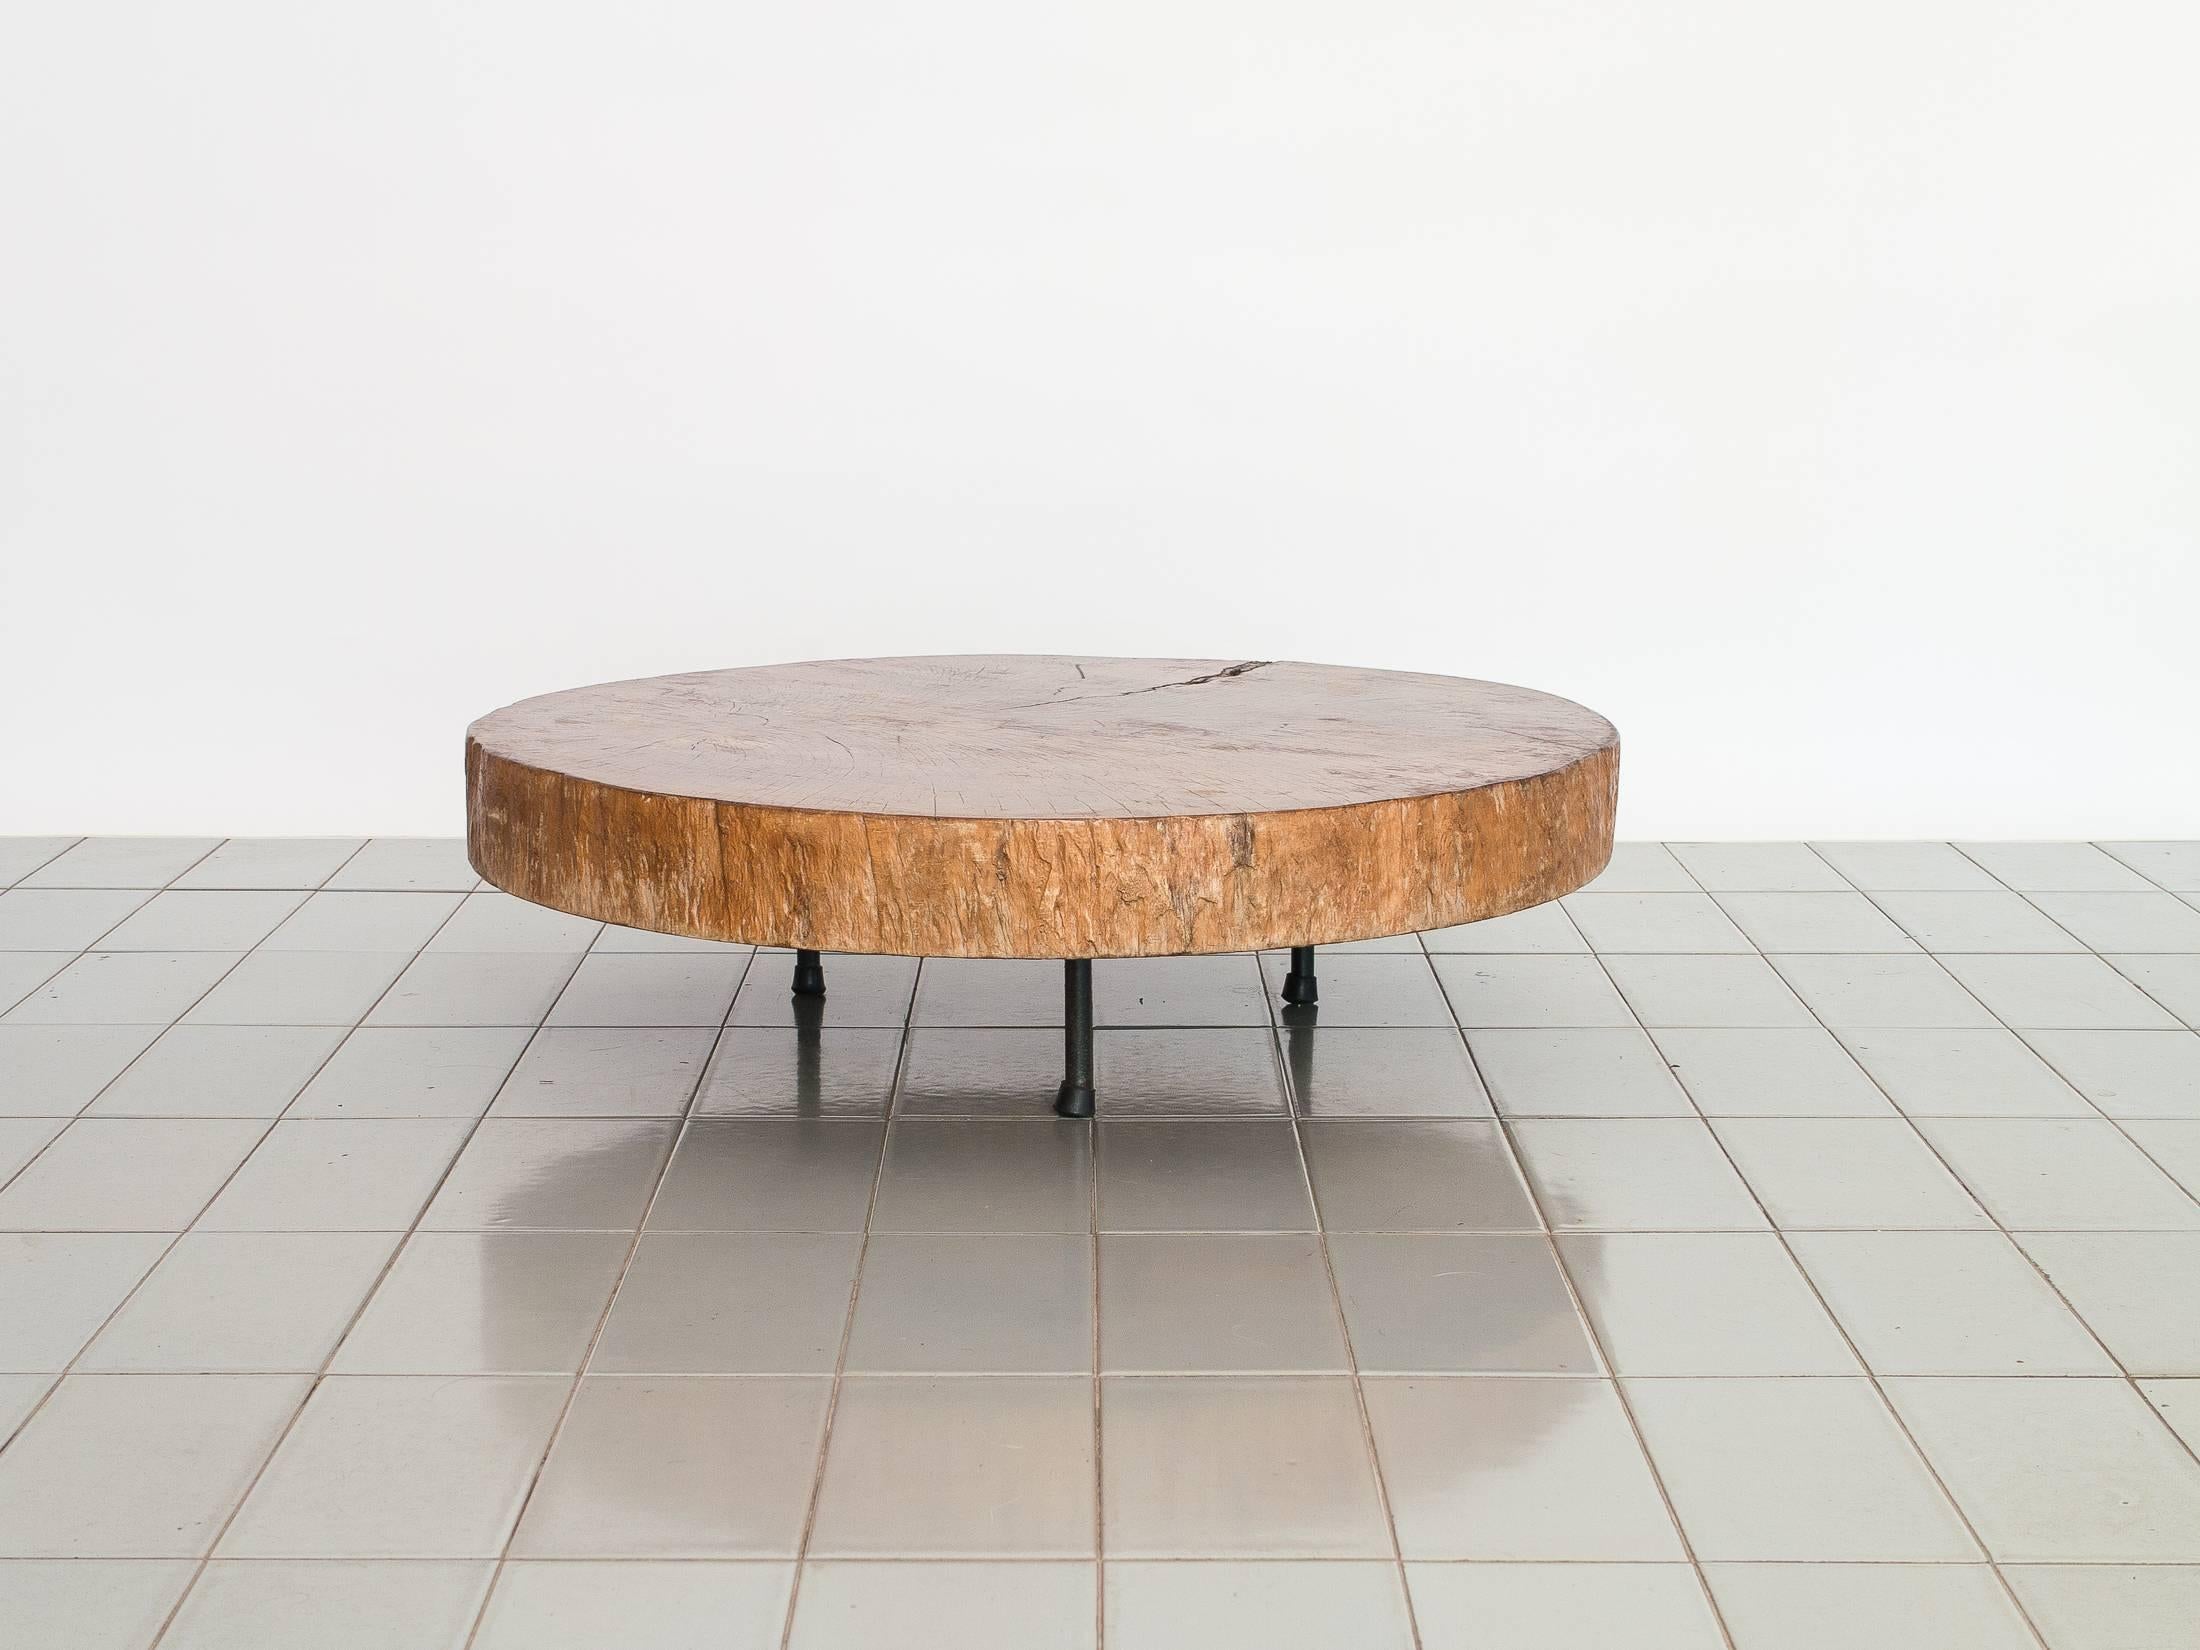 This solid Pequi Pedra top was acquired with a wooden base that was affected by termites. Its perfect round top now stands over old Unilabor iron feet. Live edges. The crack is stabile.